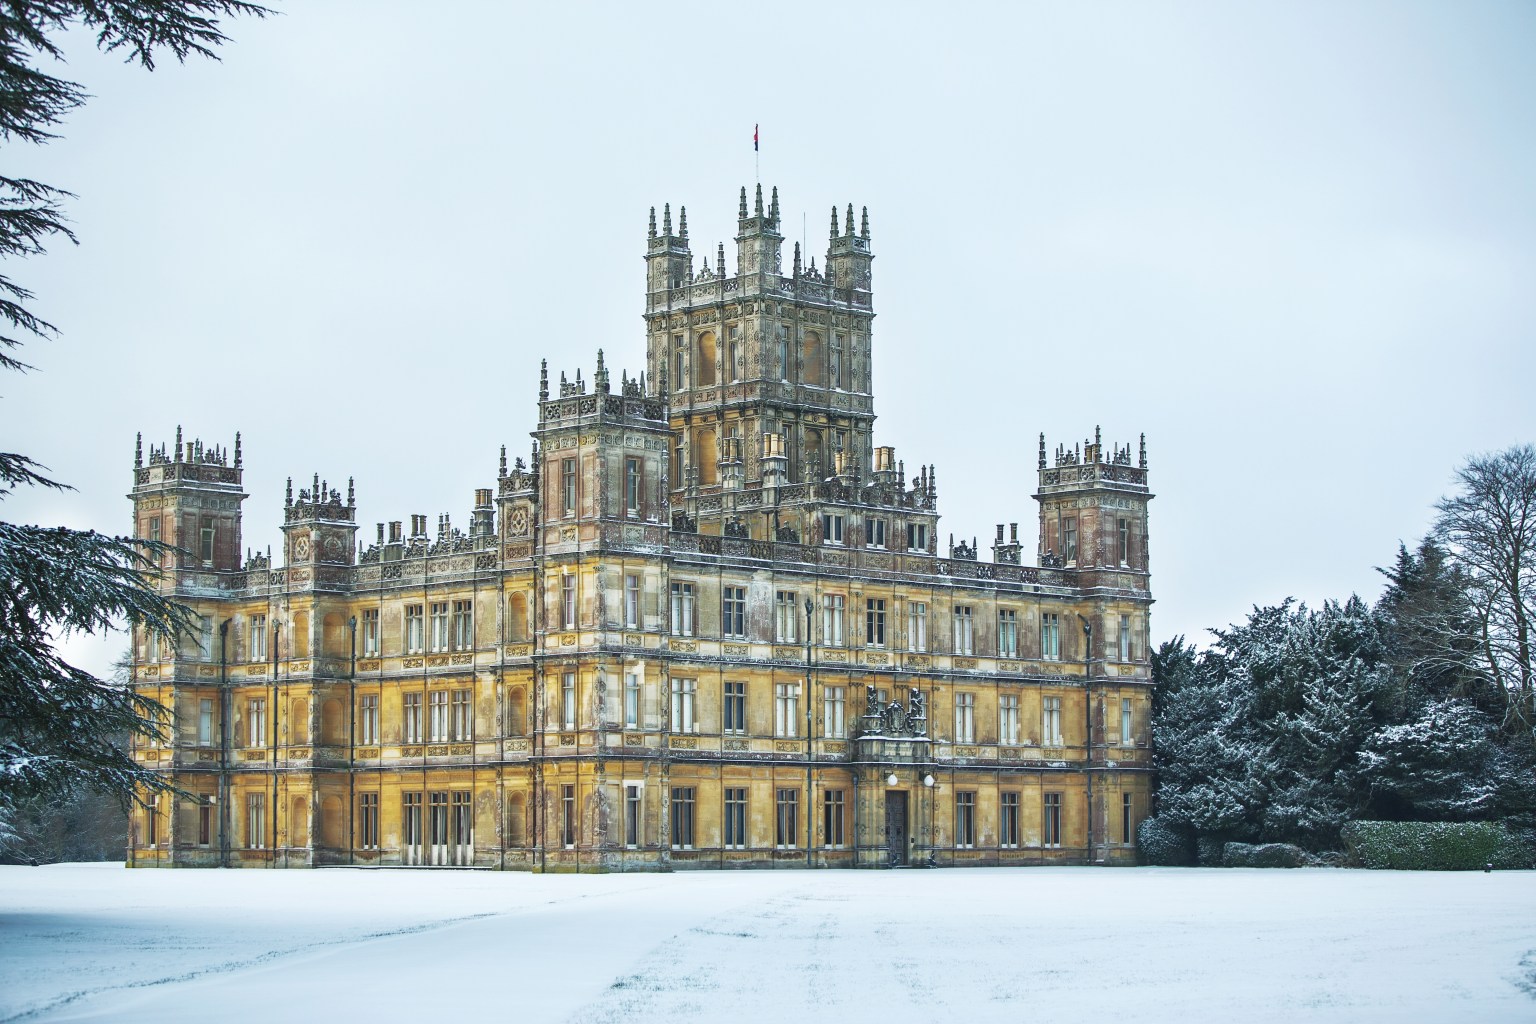 A Night at Highclere Castle